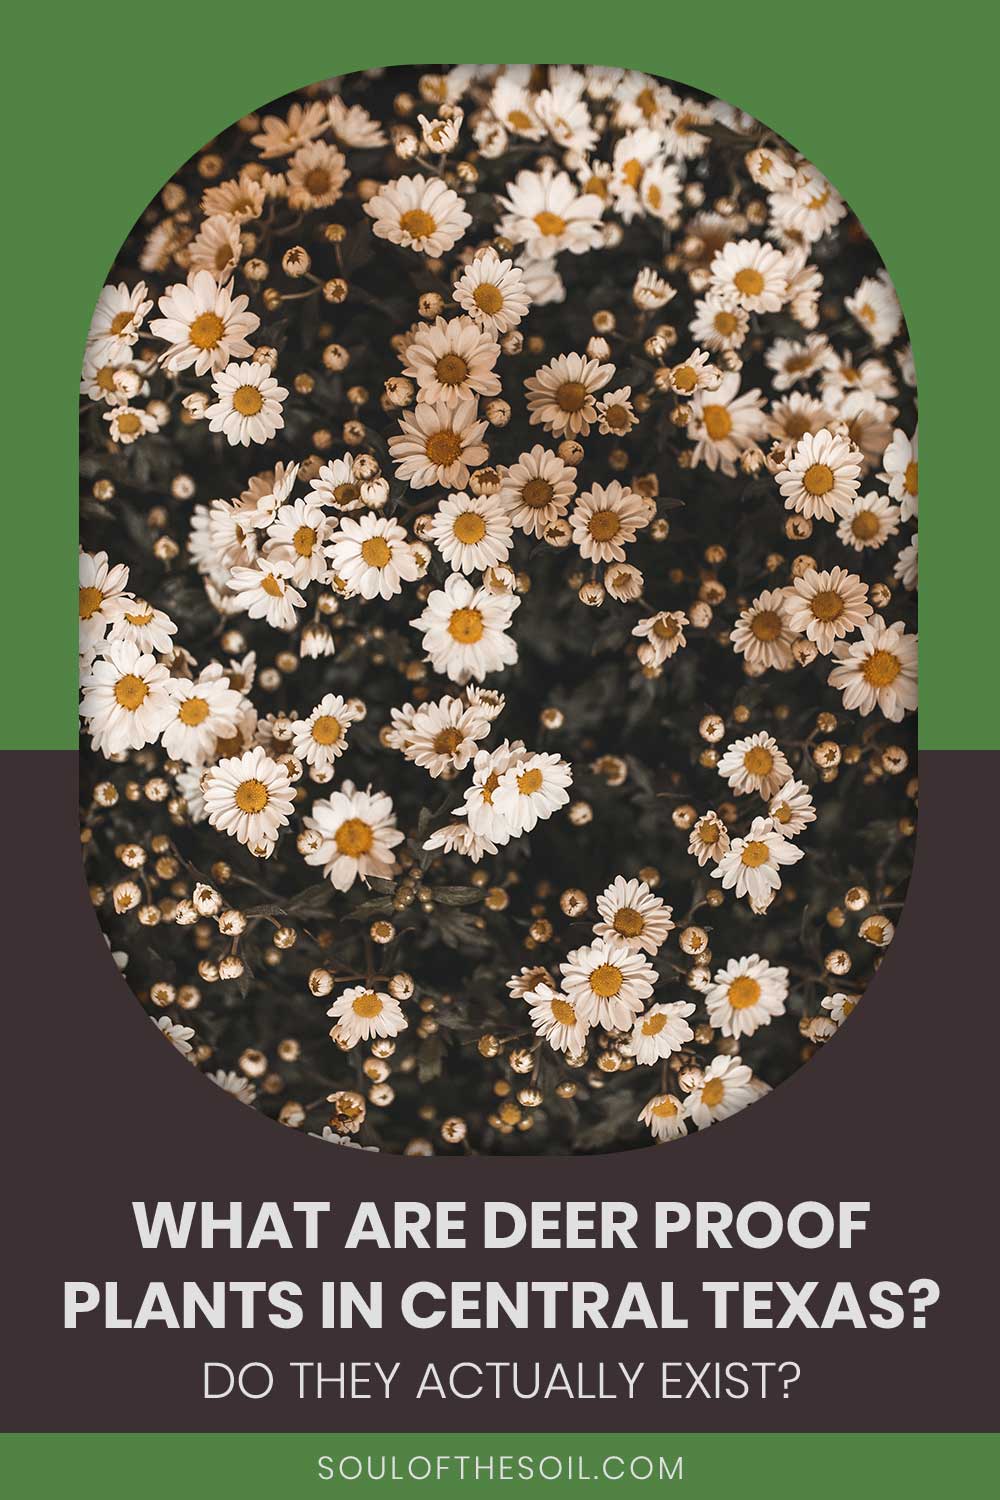 Blackfoot daisy - What are Deer Proof Plants In Central Texas